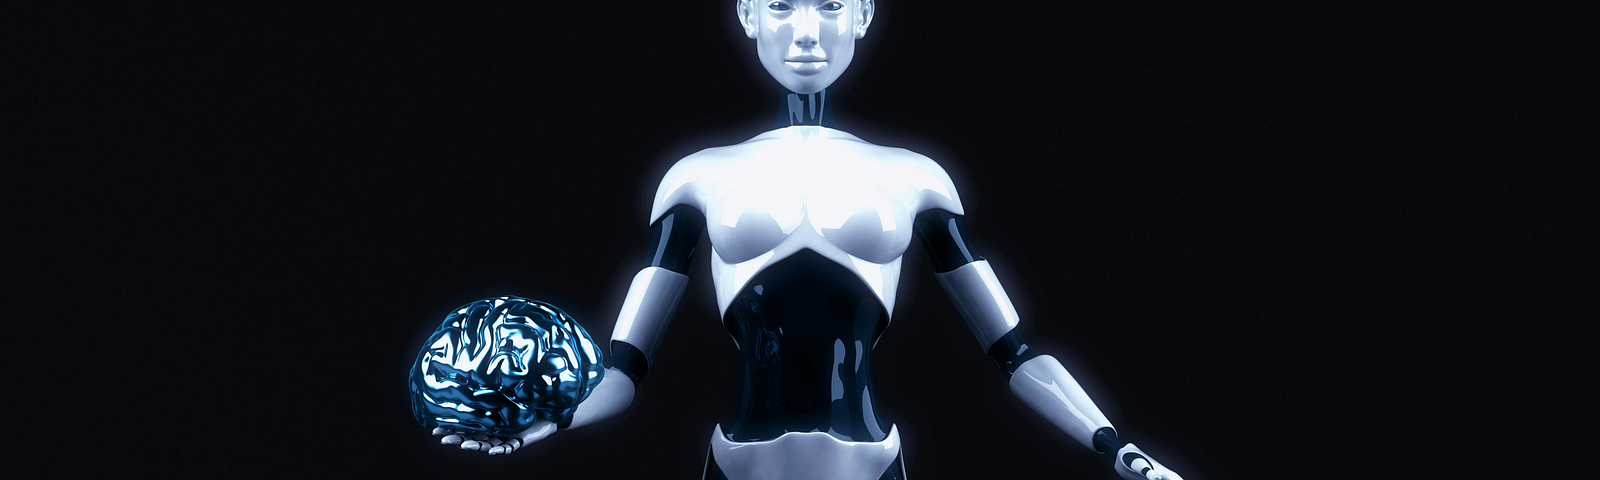 Black background, a female robot holding an artificial brain in her right hand